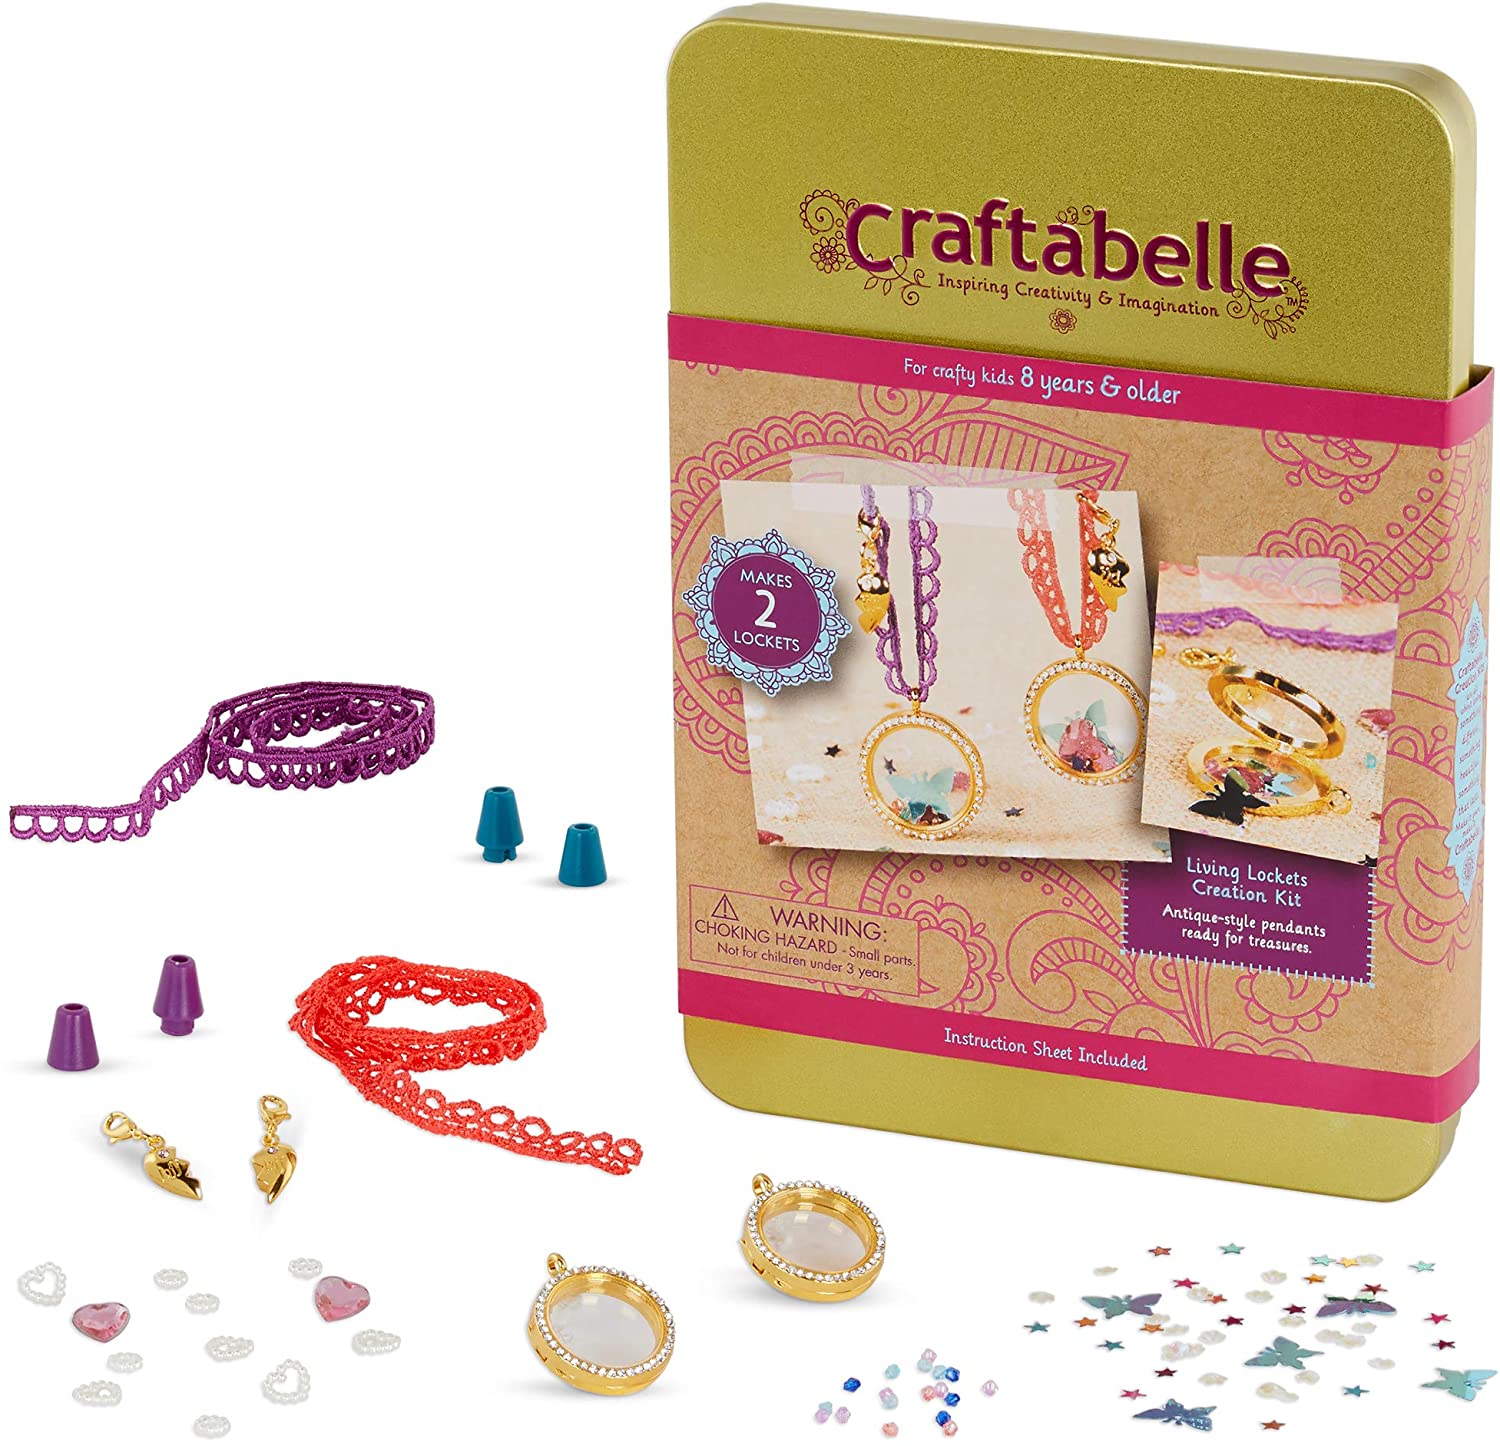 Craftabelle: 85-Piece Living Lockets Creation Kit $5.42, 28-Piece Off the Cuff Creation Kit $6.78 + Free Shipping w/ Prime or on $25+